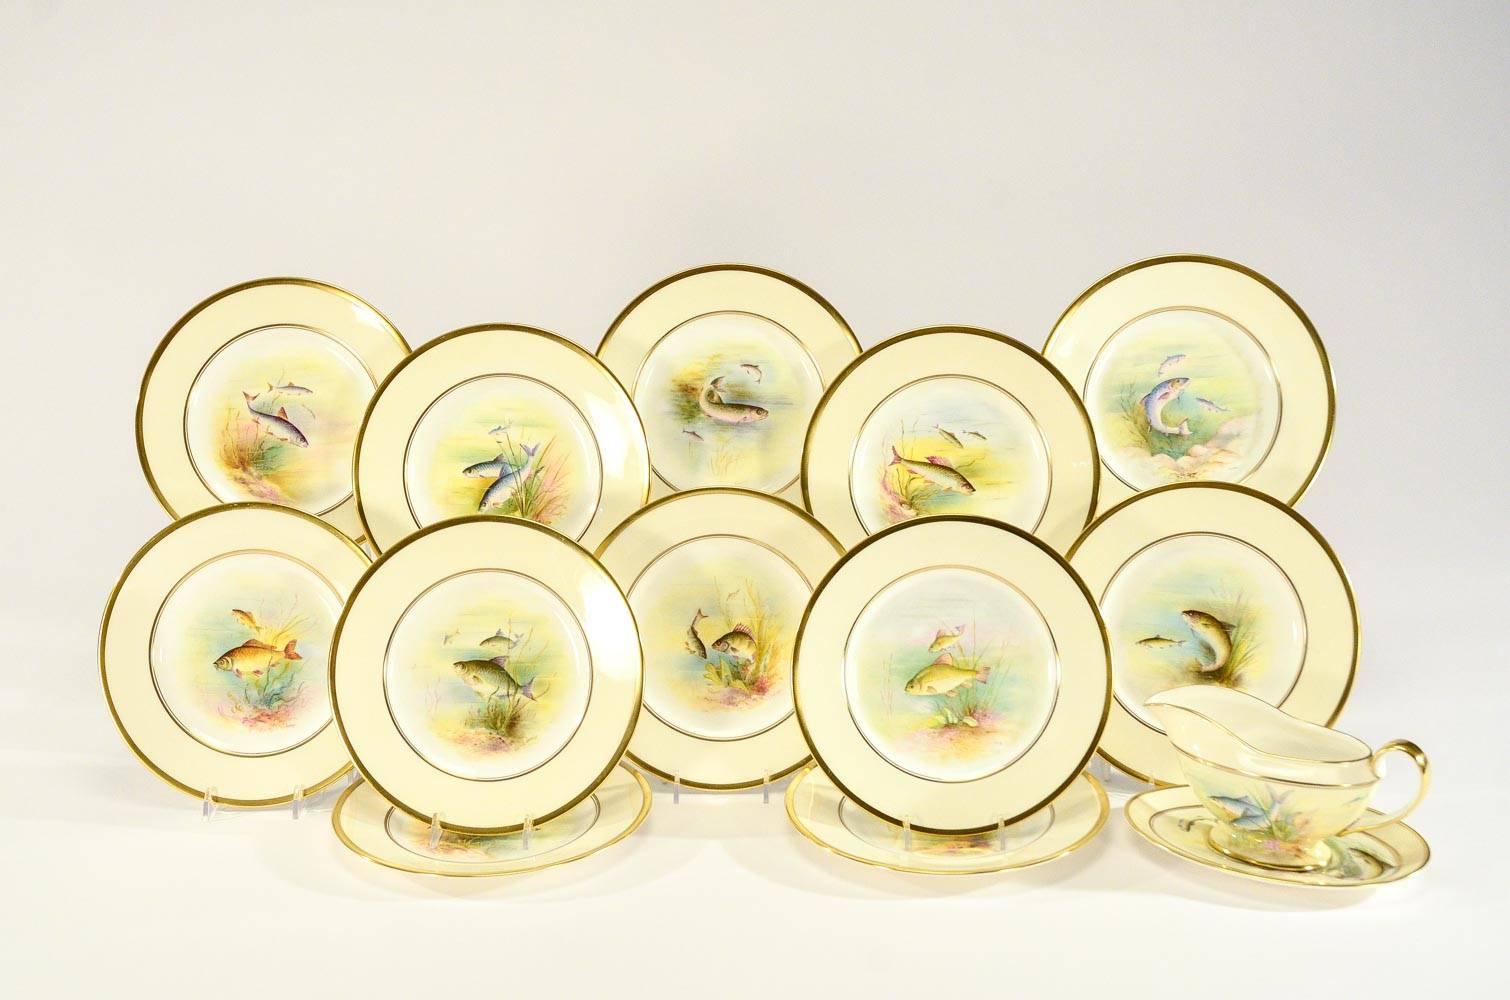 This a complete Minton fish service that is hand painted and Artist-signed consisting of 12 plates which measure 9.75